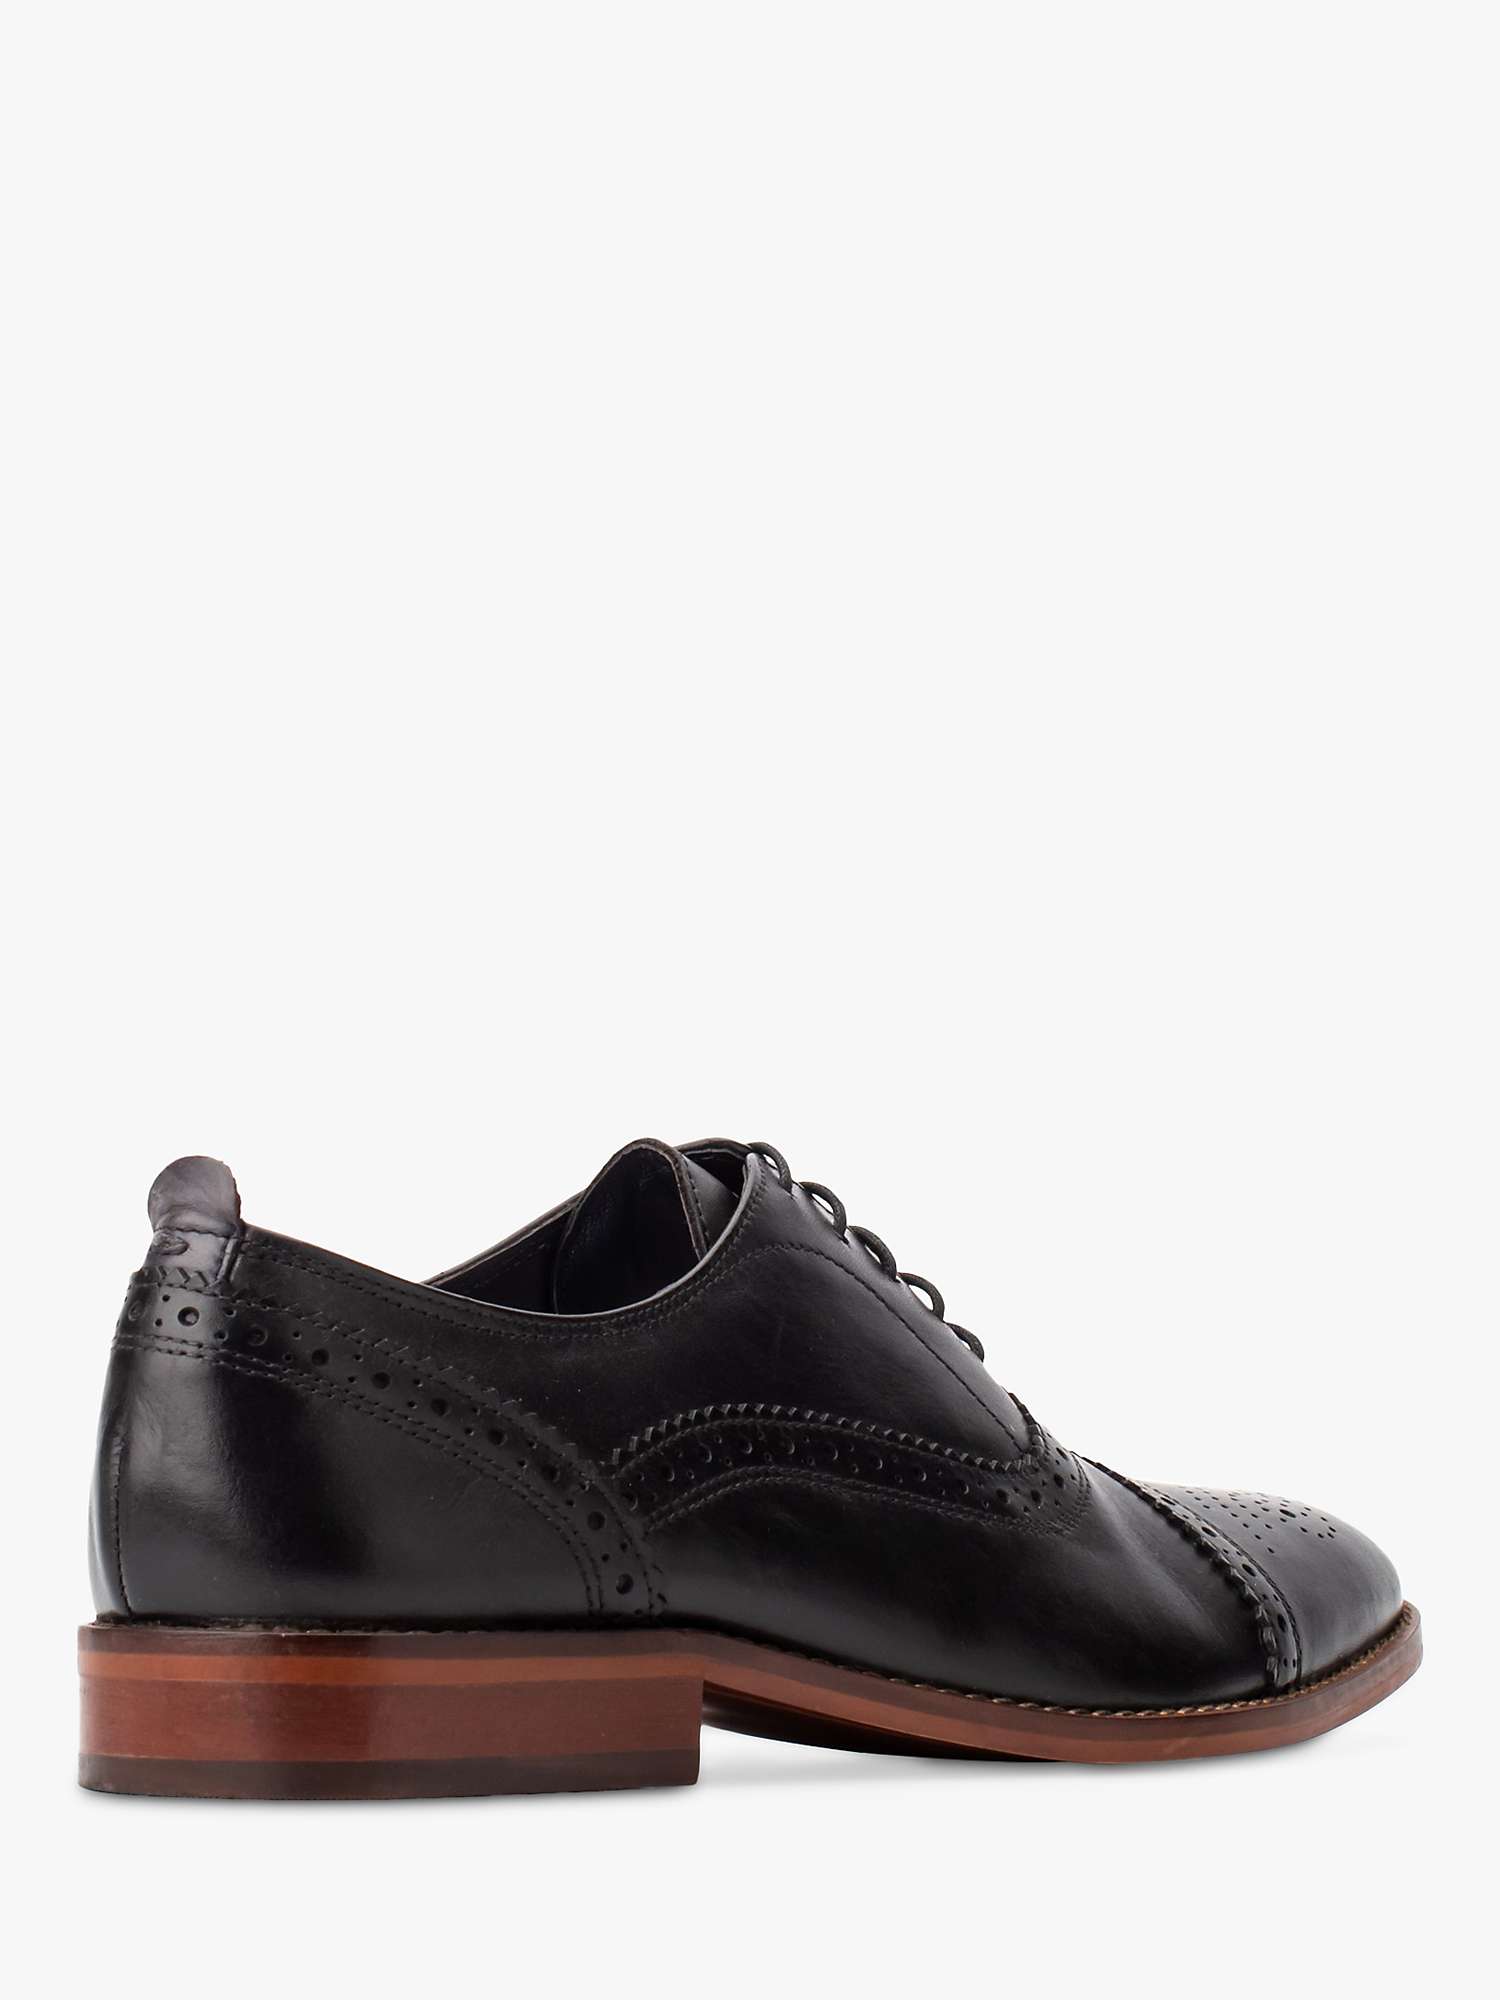 Buy Base London Cast Waxy Brogue Shoes, Black Online at johnlewis.com